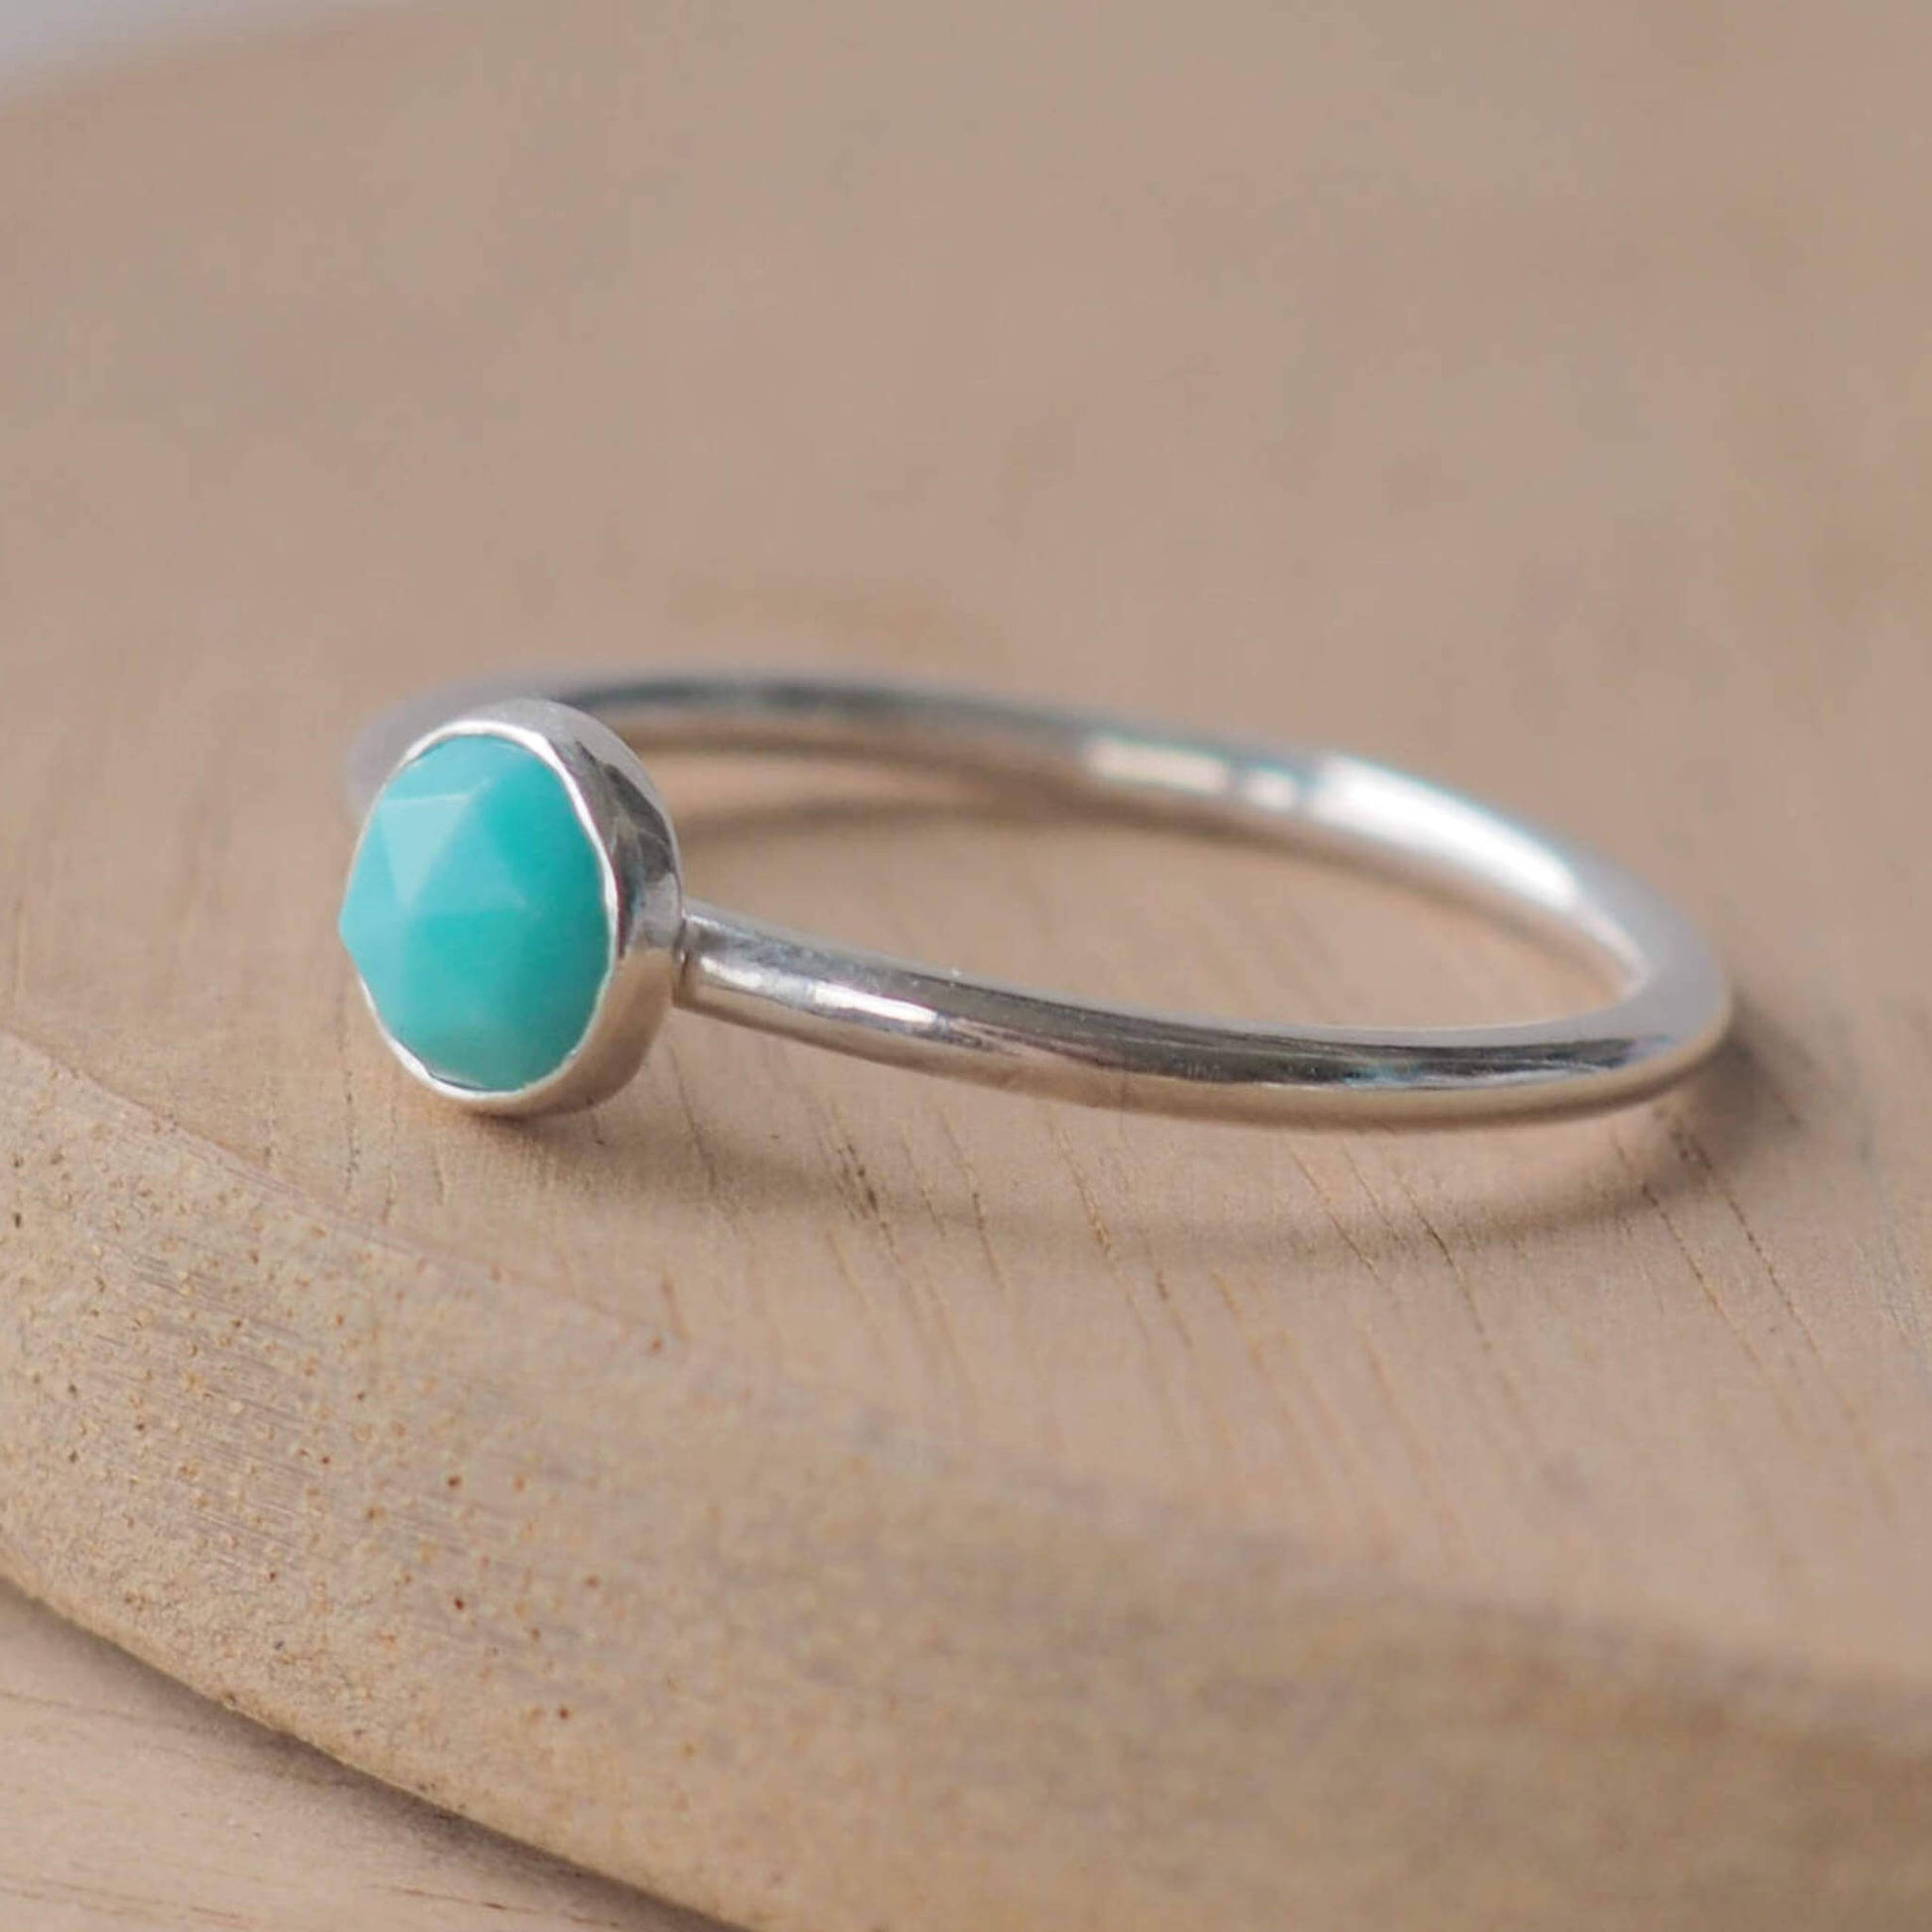 sterling silver and turquoise gemstone ring with a round stone. Handmade in Scotland by maram jewellery